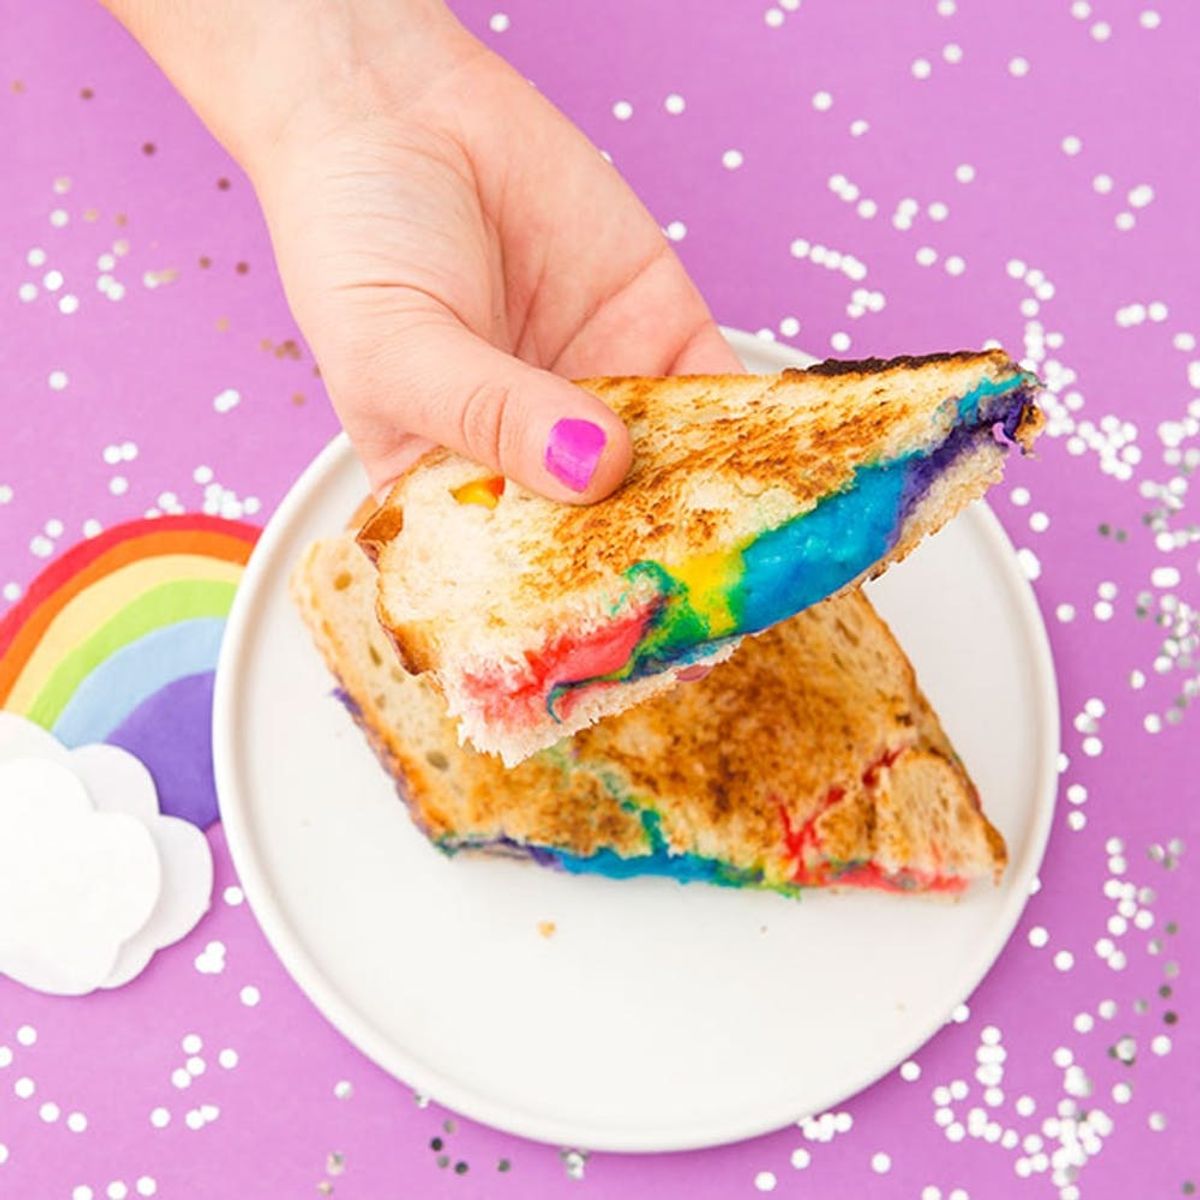 Upgrade Your Sandwich With This Magical Rainbow Grilled Cheese Recipe